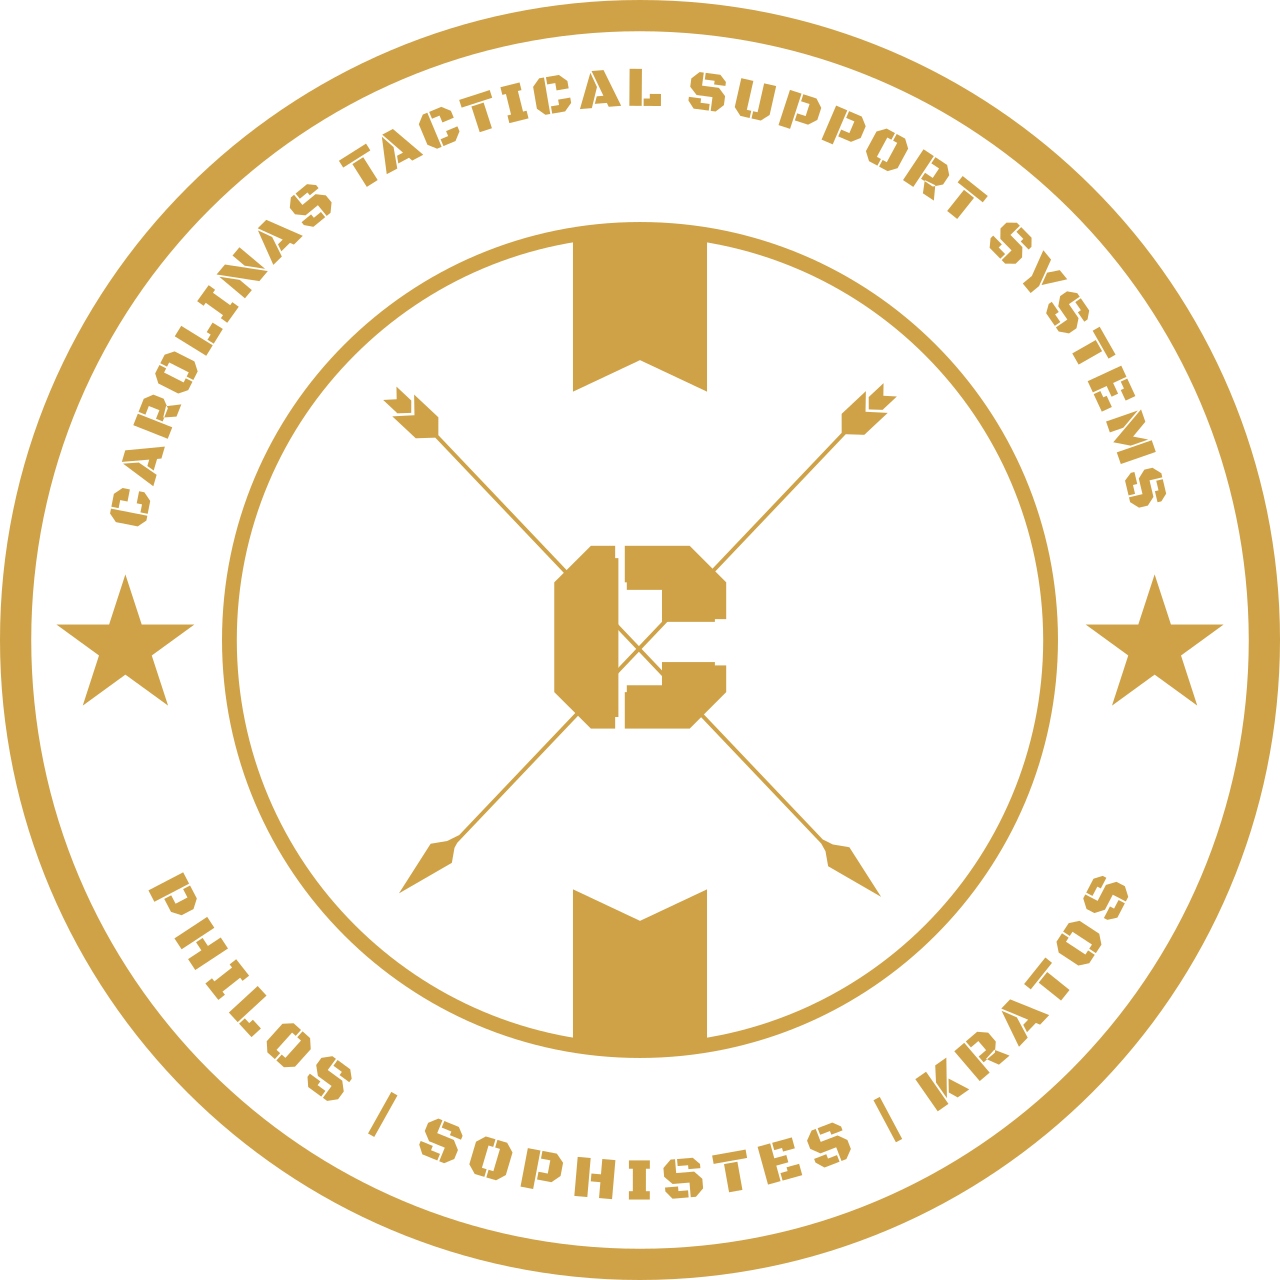 CAROLINAS TACTICAL SUPPORT SYSTEMS 's web page